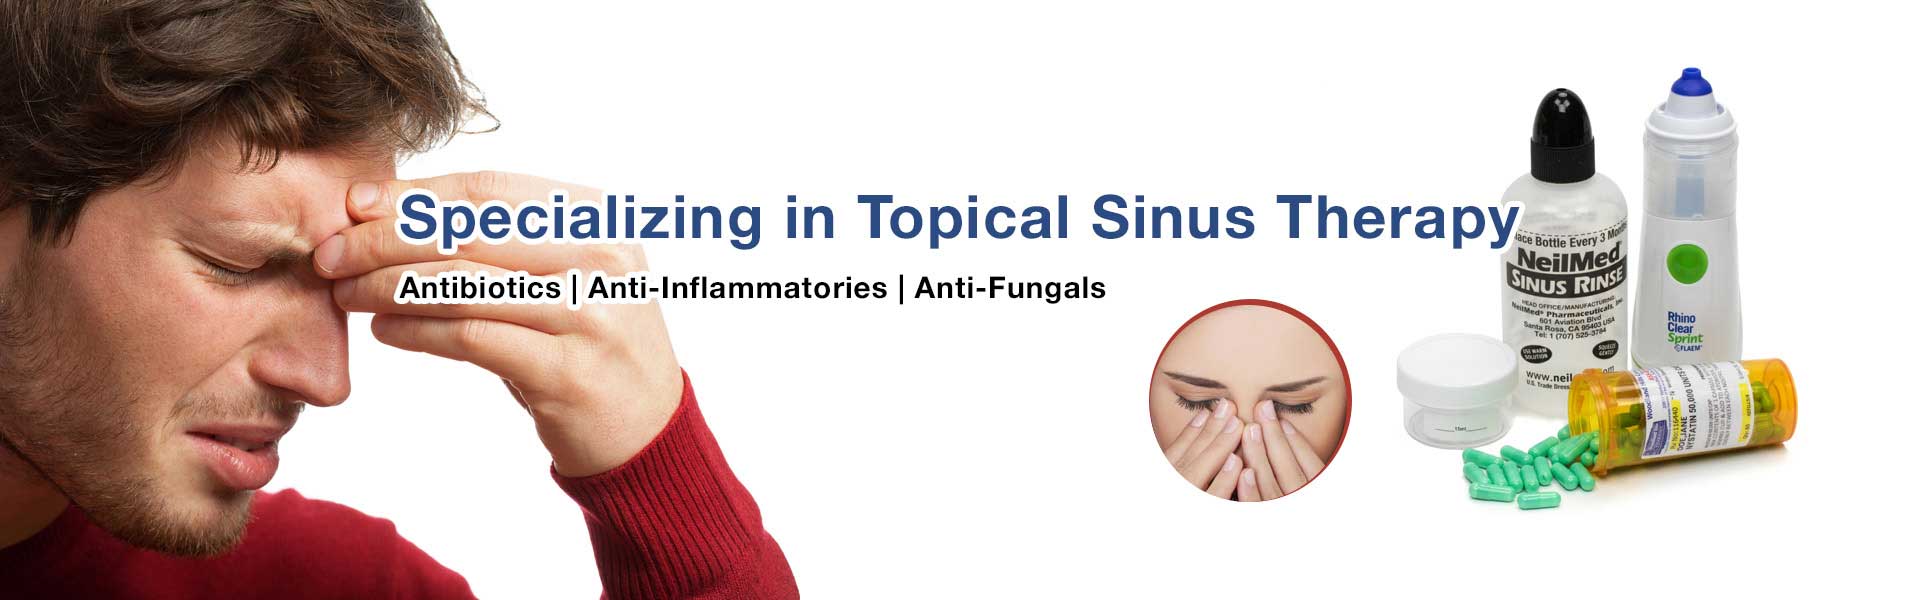 topical sinus therapy includes antibiotics, anti-inflammatories, and anti-fungals